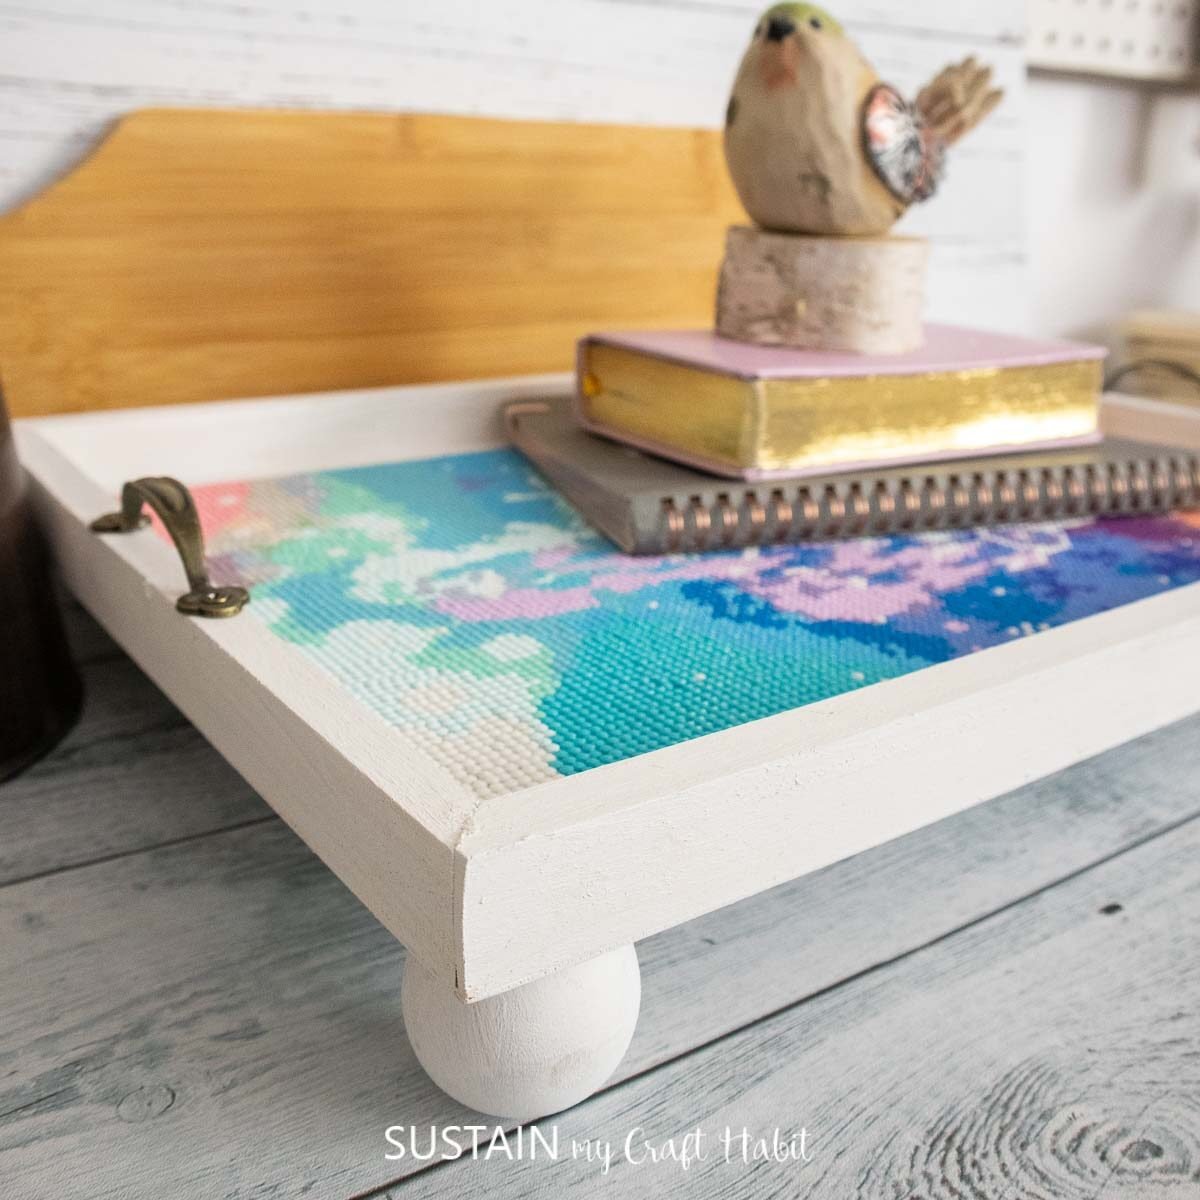 The Best Craft Tables For Diamond Painting - Diamond Painting Guide